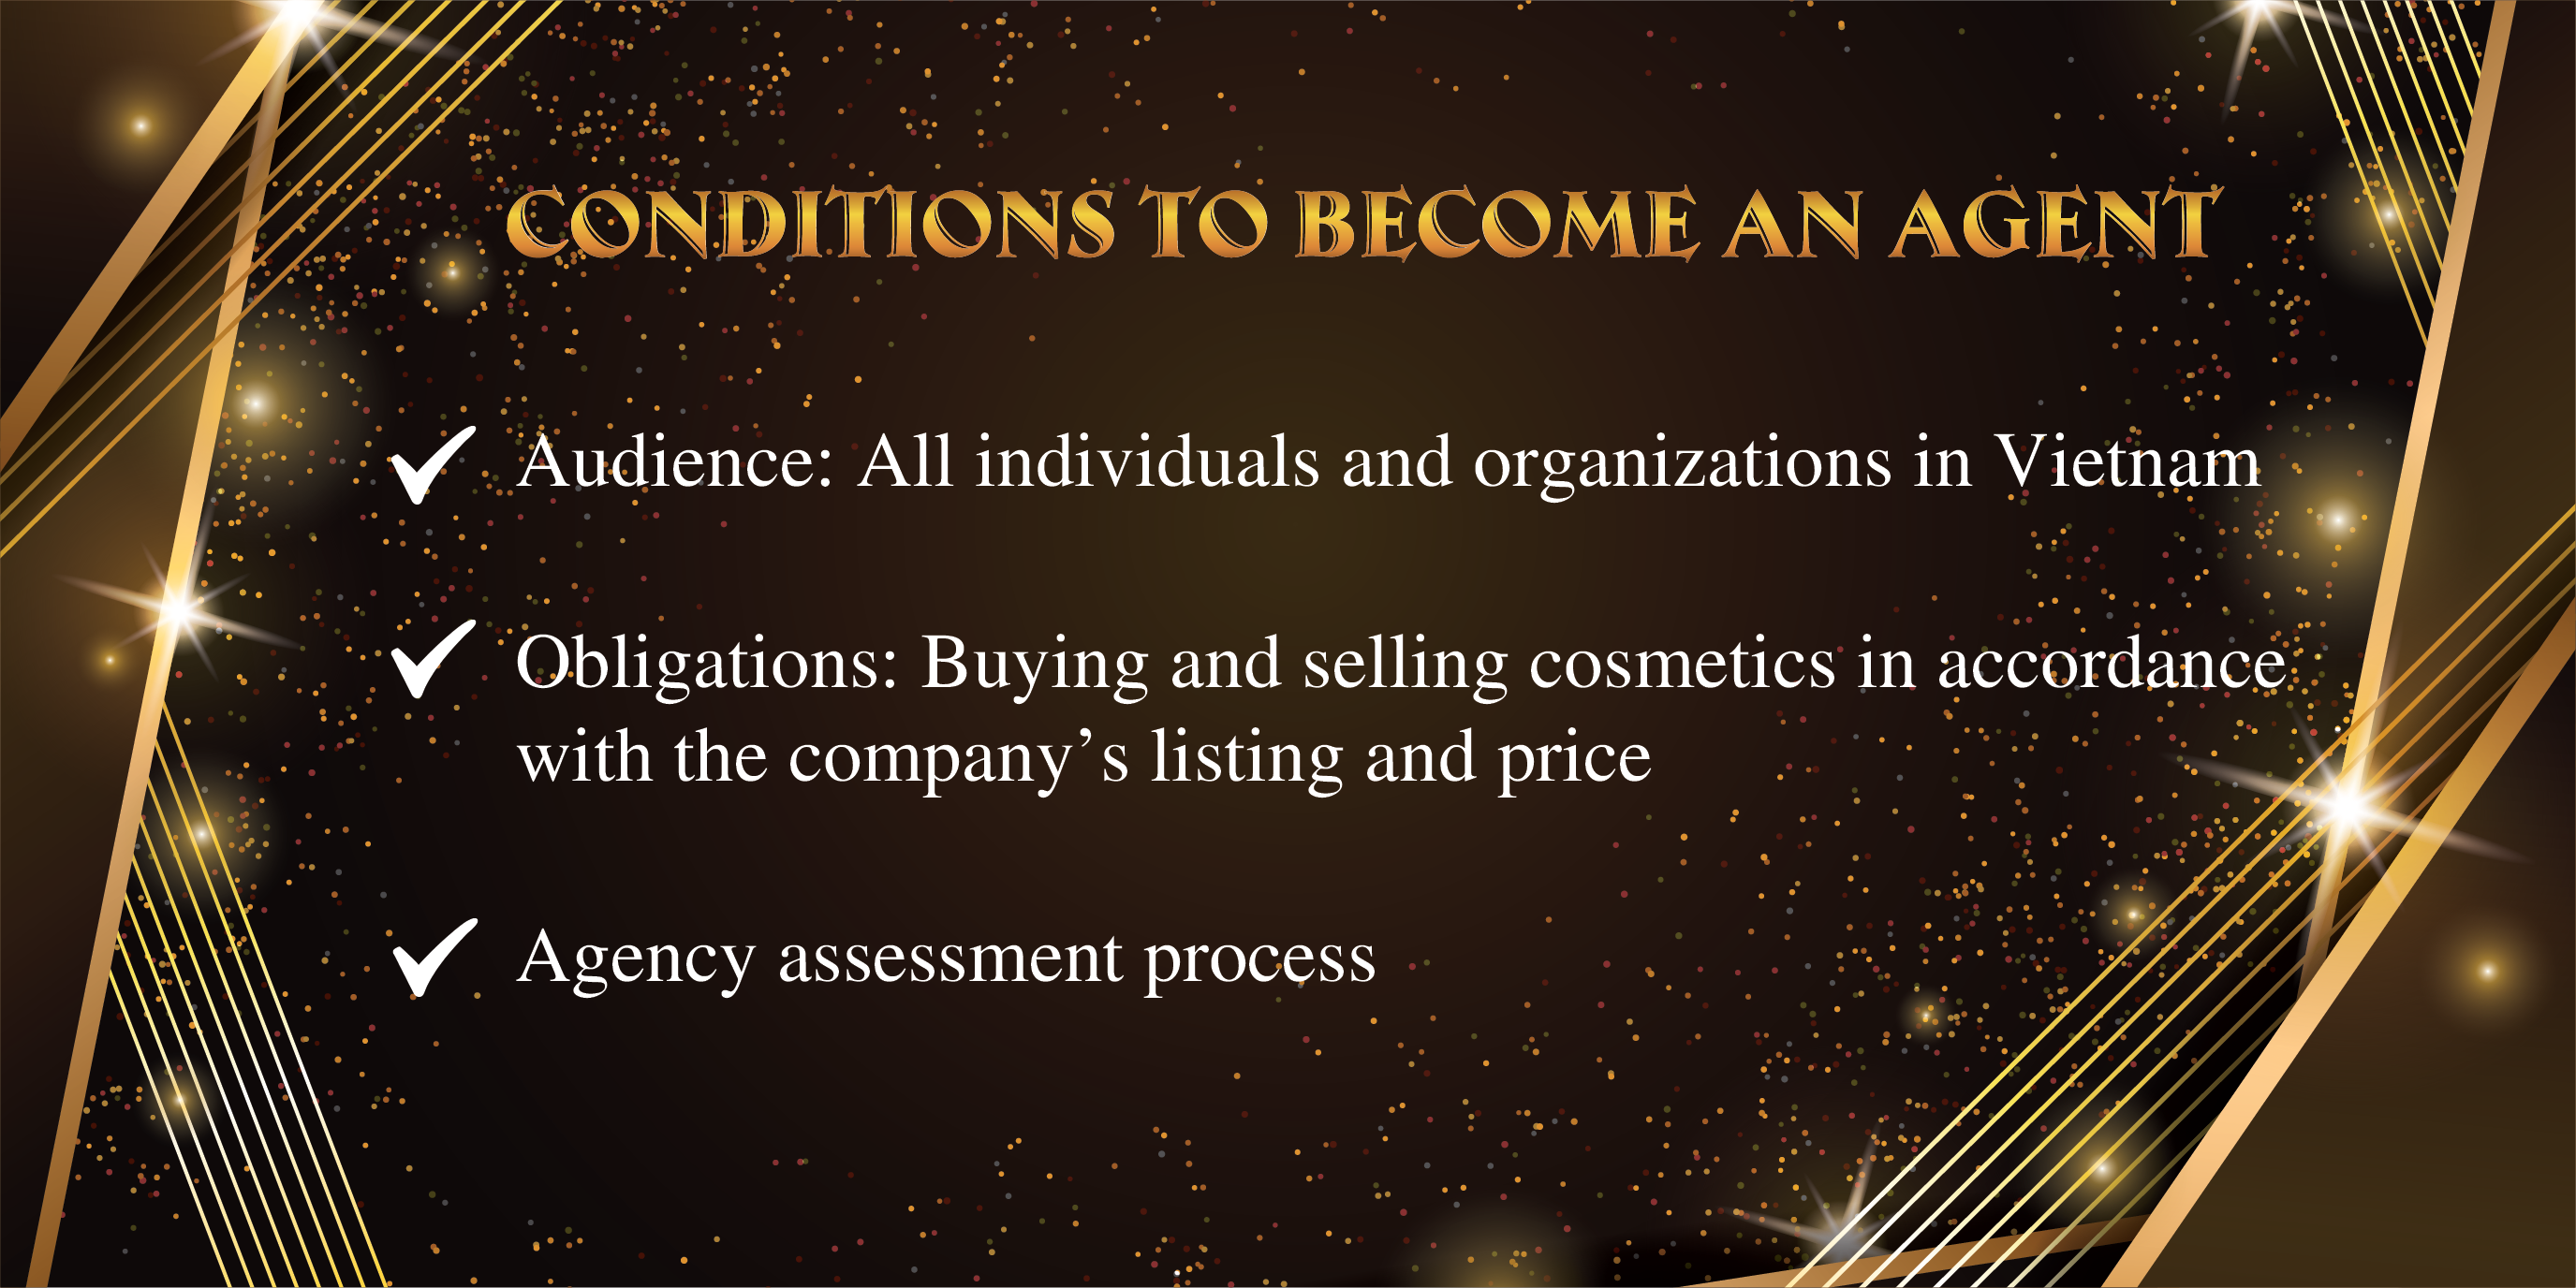 Conditions to become an agent